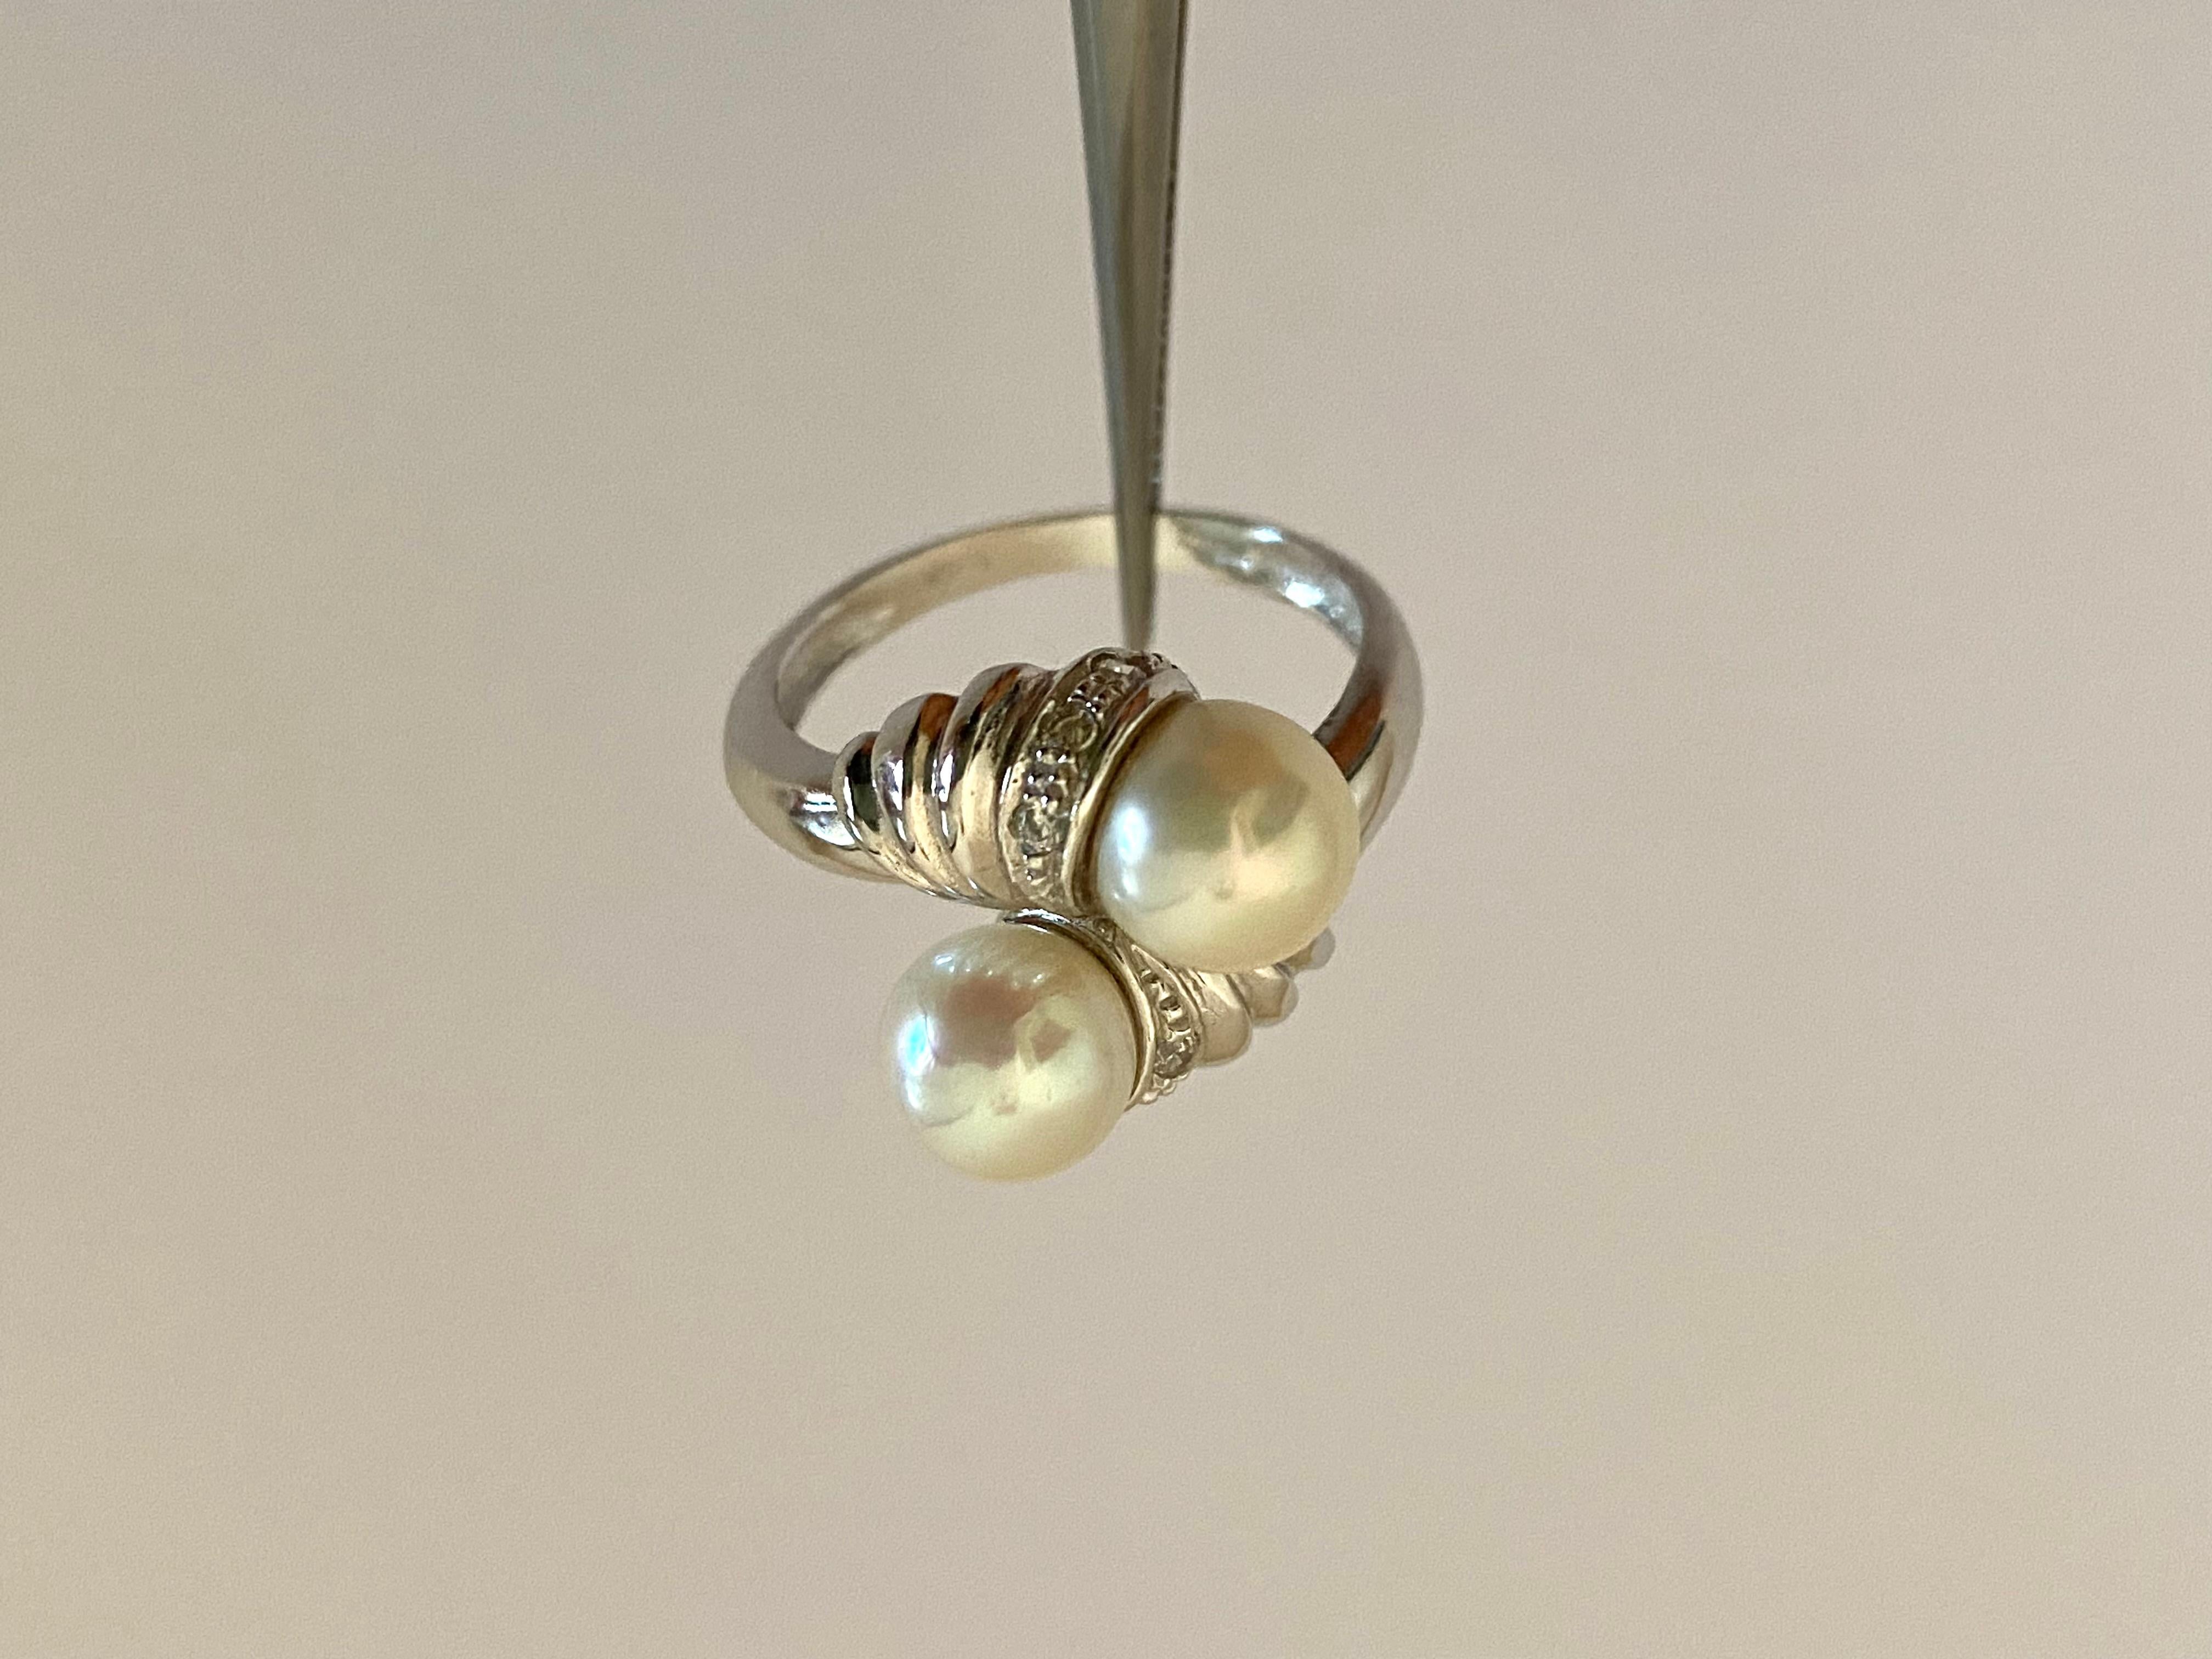 It weighs 5.1 grams and measures 14 (54 American size). There are two sea cultured pearls, diameter mm7, category AA +, set with brilliant cut diamonds G color vs1 ct 0.06.
I ship in an elegant gift box illuminated with LEDs and I enclose a written